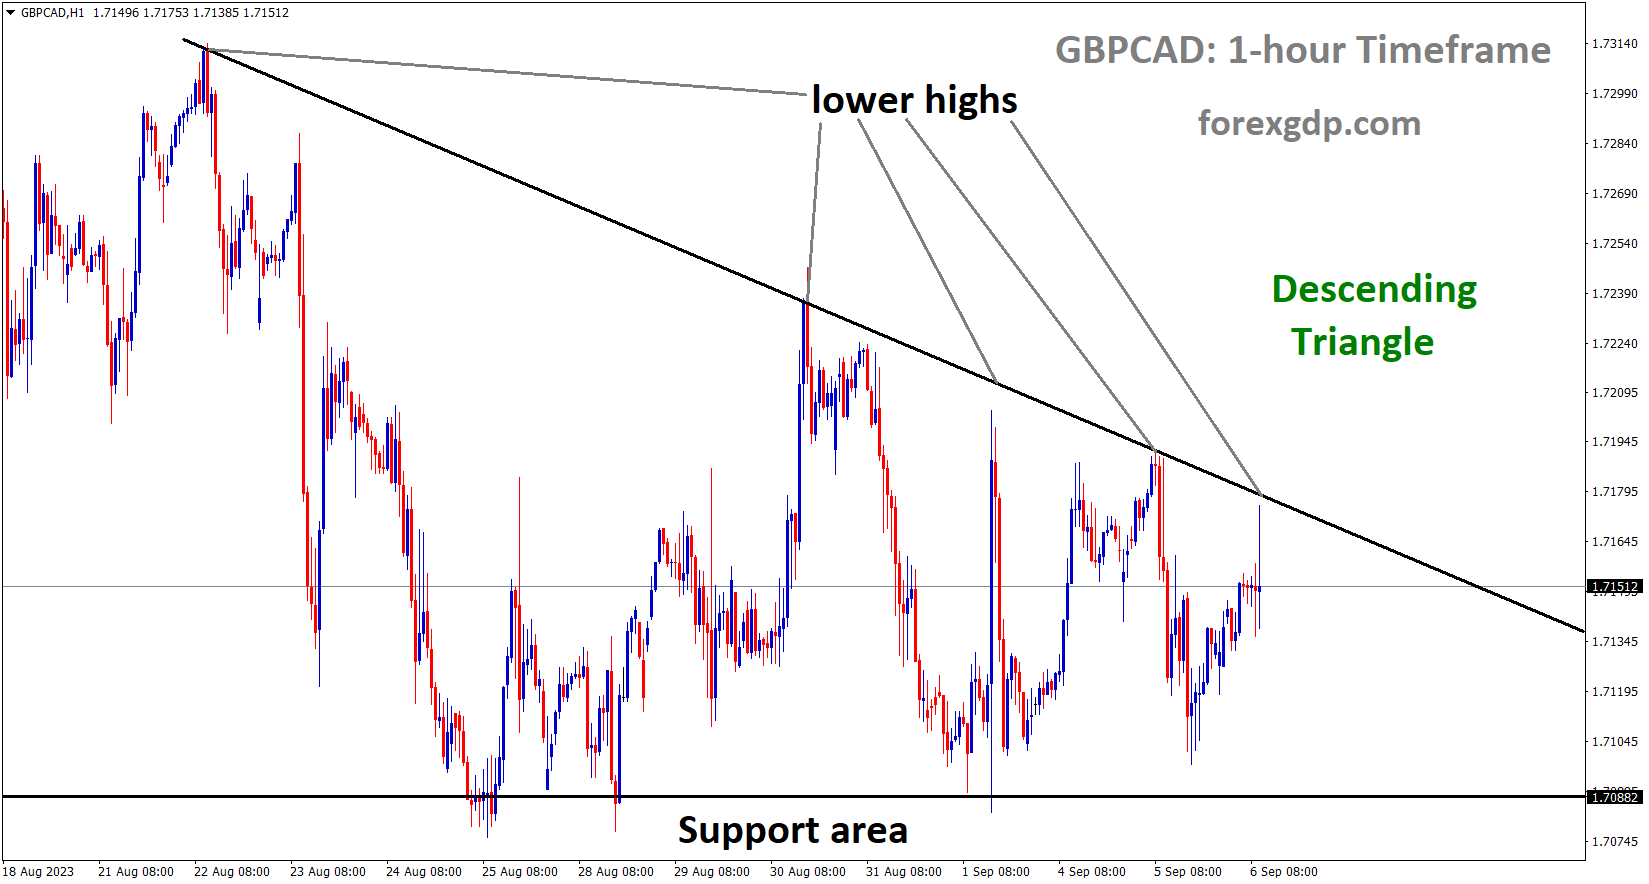 GBPCAD is moving in the Descending triangle pattern and the market has reached the lower high area of the pattern